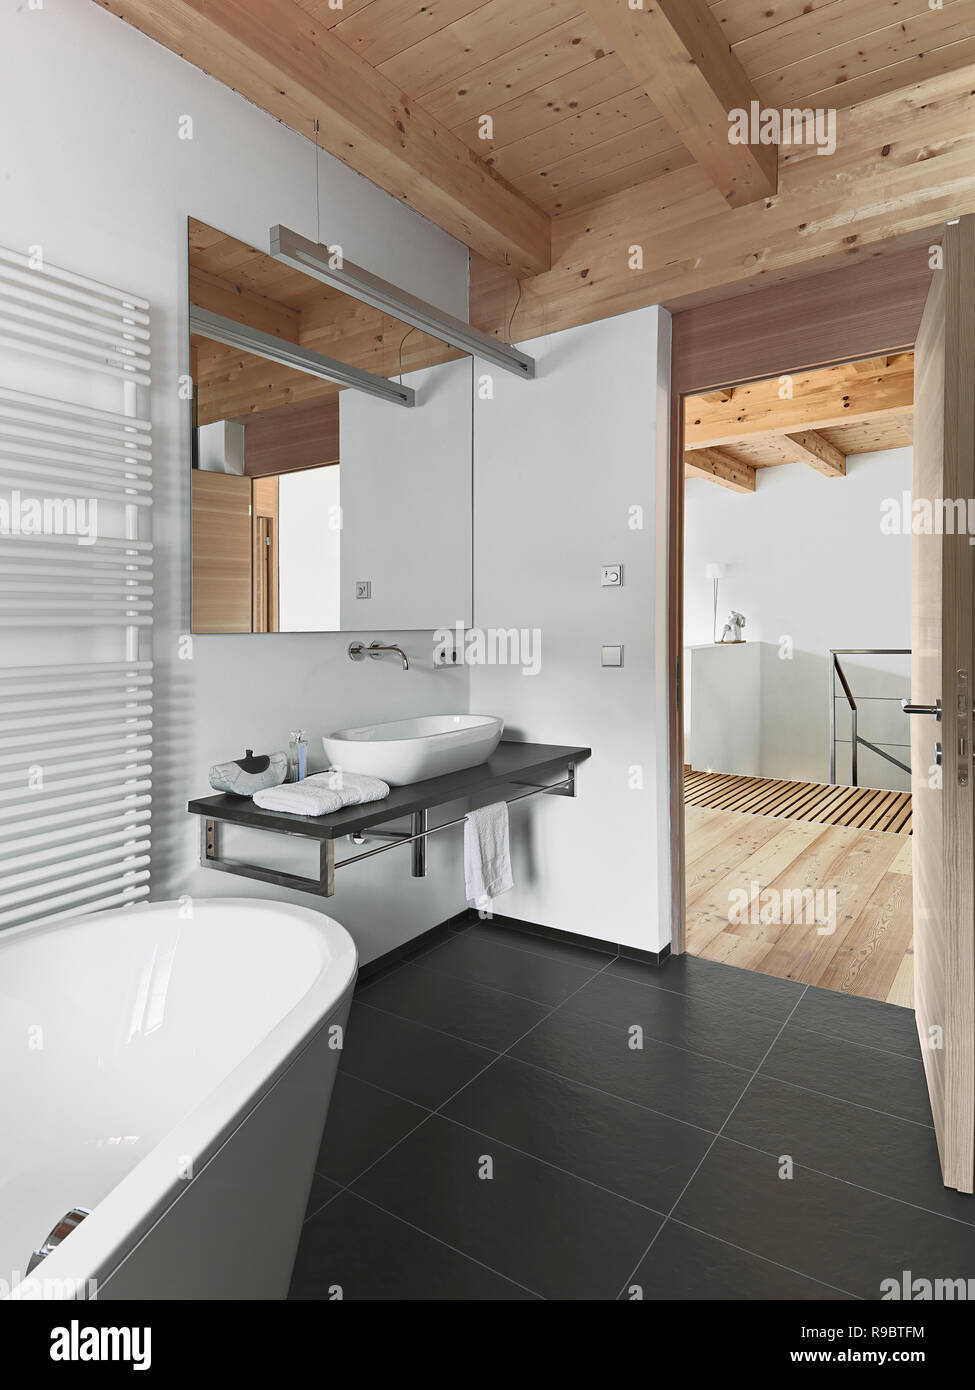 interiors shots of a modern bathroom with wooden ceiling in the foreground the bathtub and the counter top washbasin Stock Photo